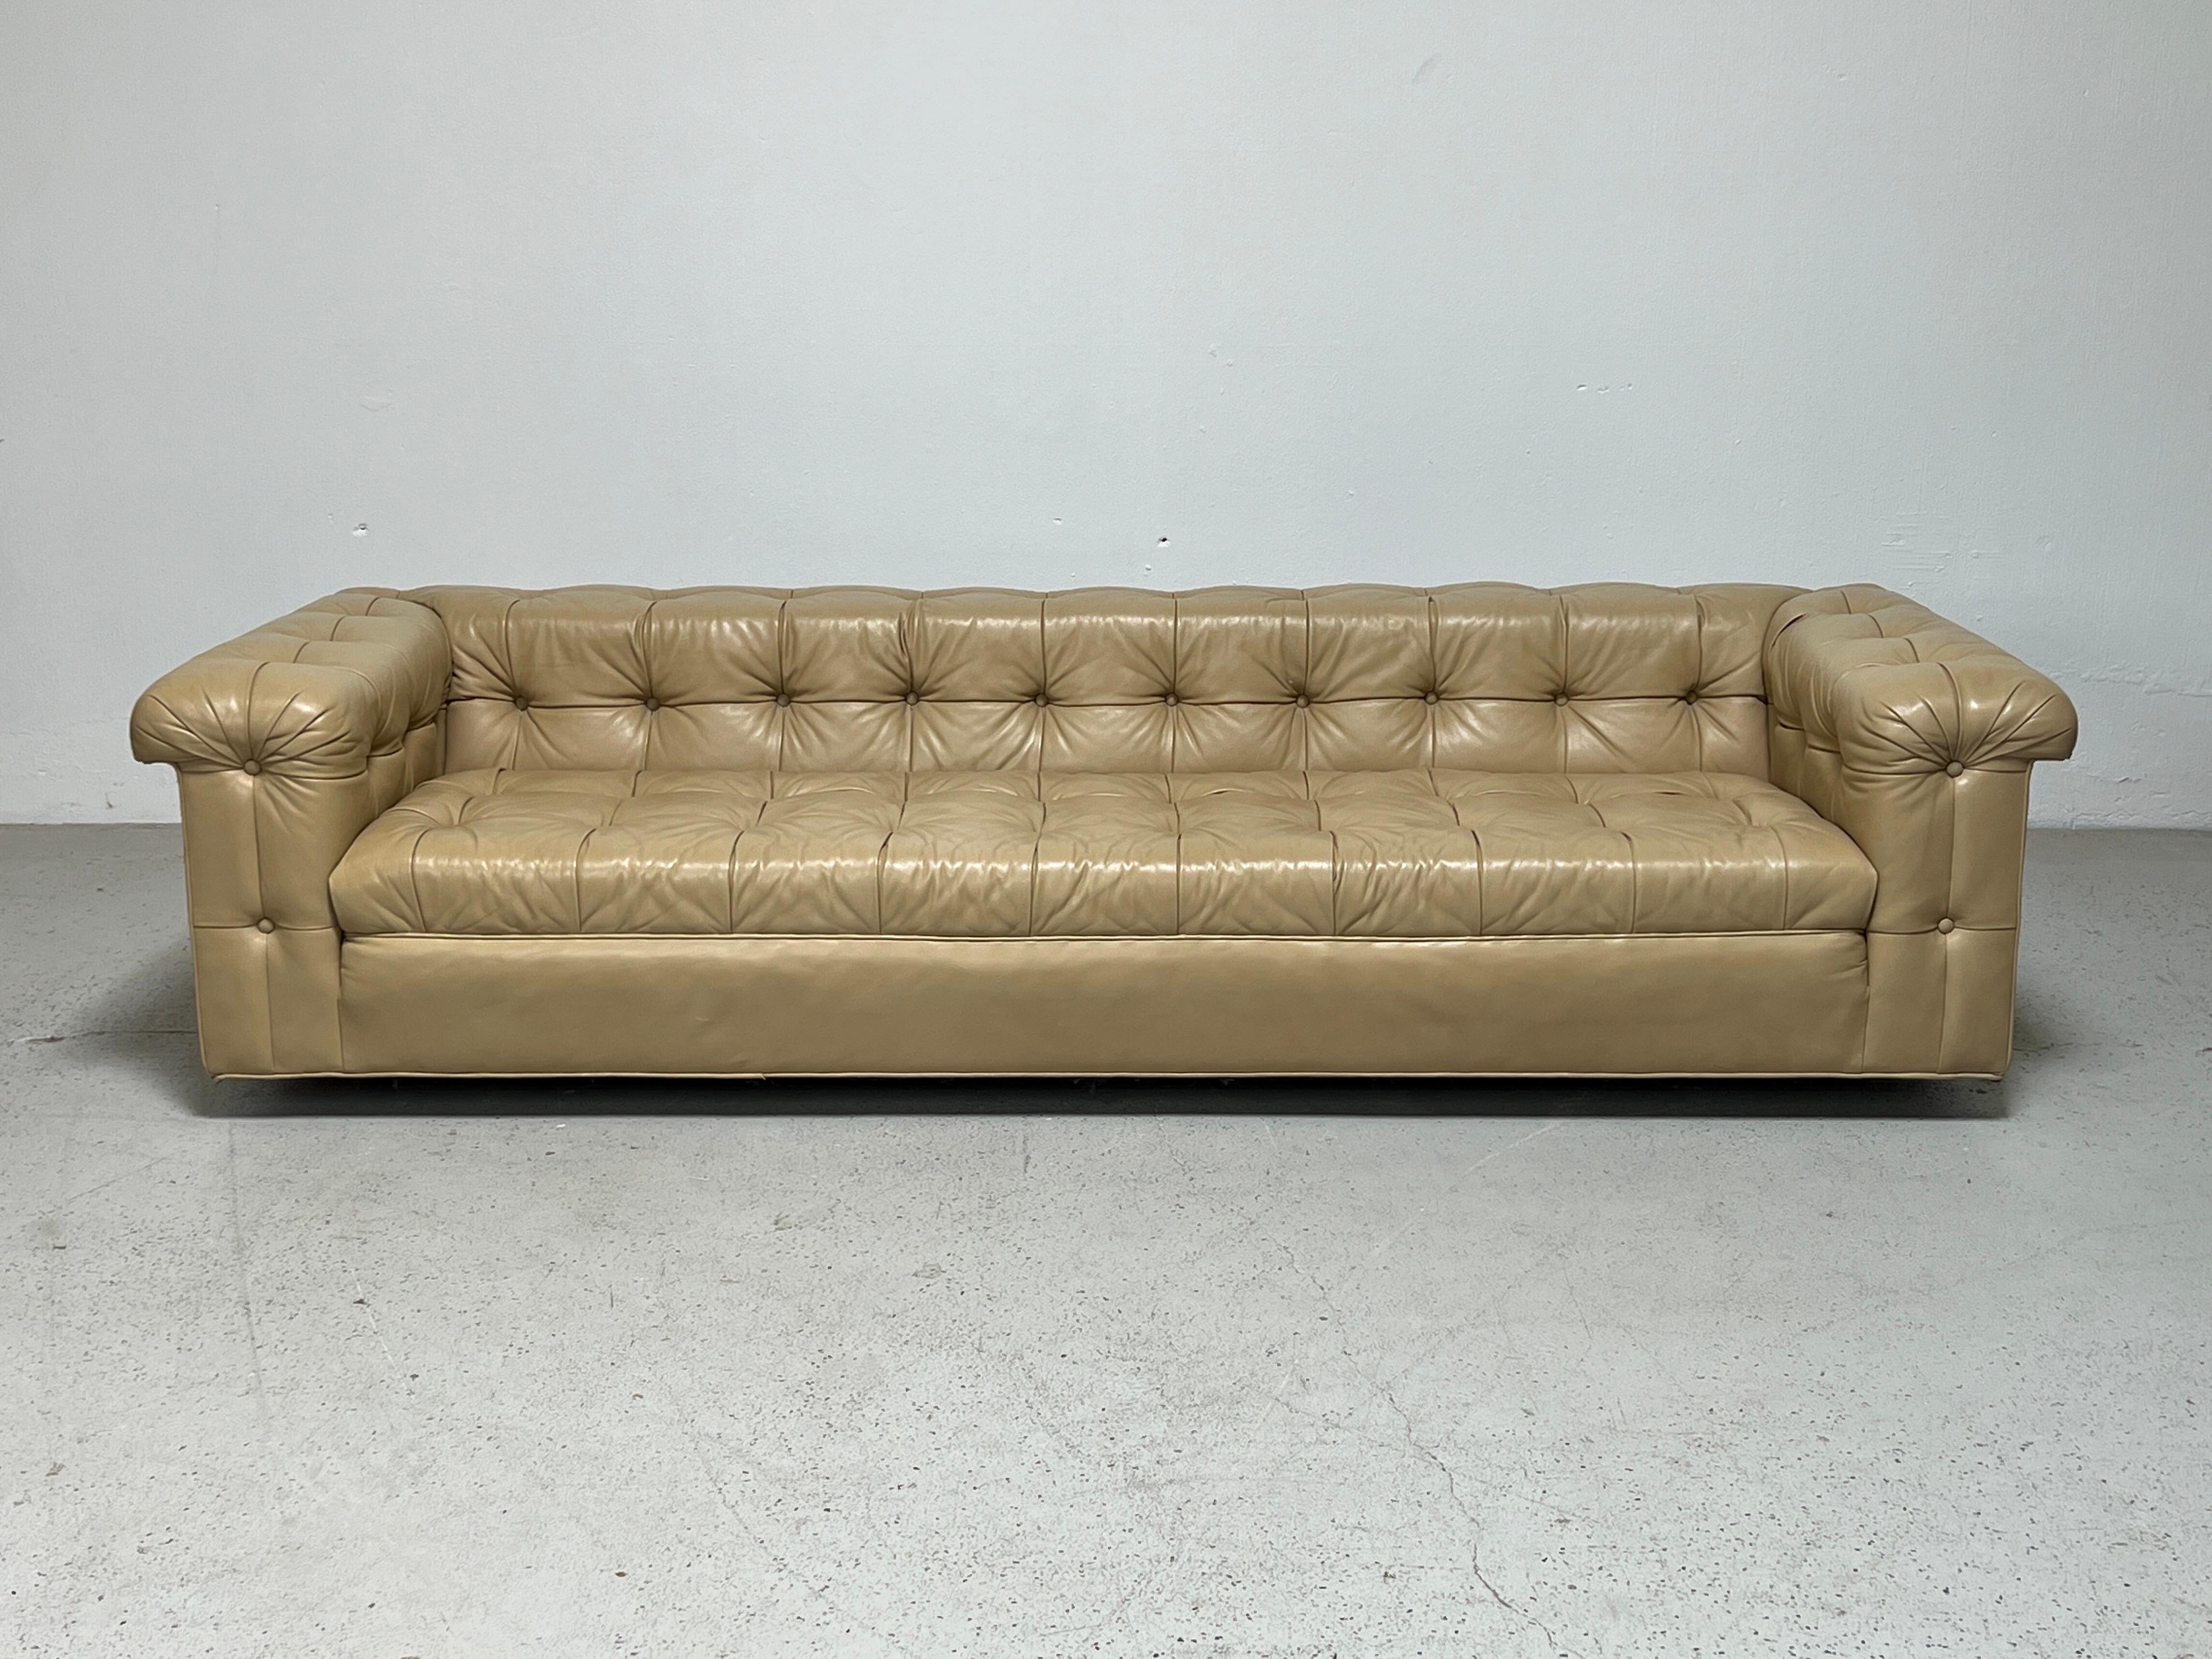 Pair of Party Sofas by Edward Wormley for Dunbar in Original Leather In Good Condition For Sale In Dallas, TX